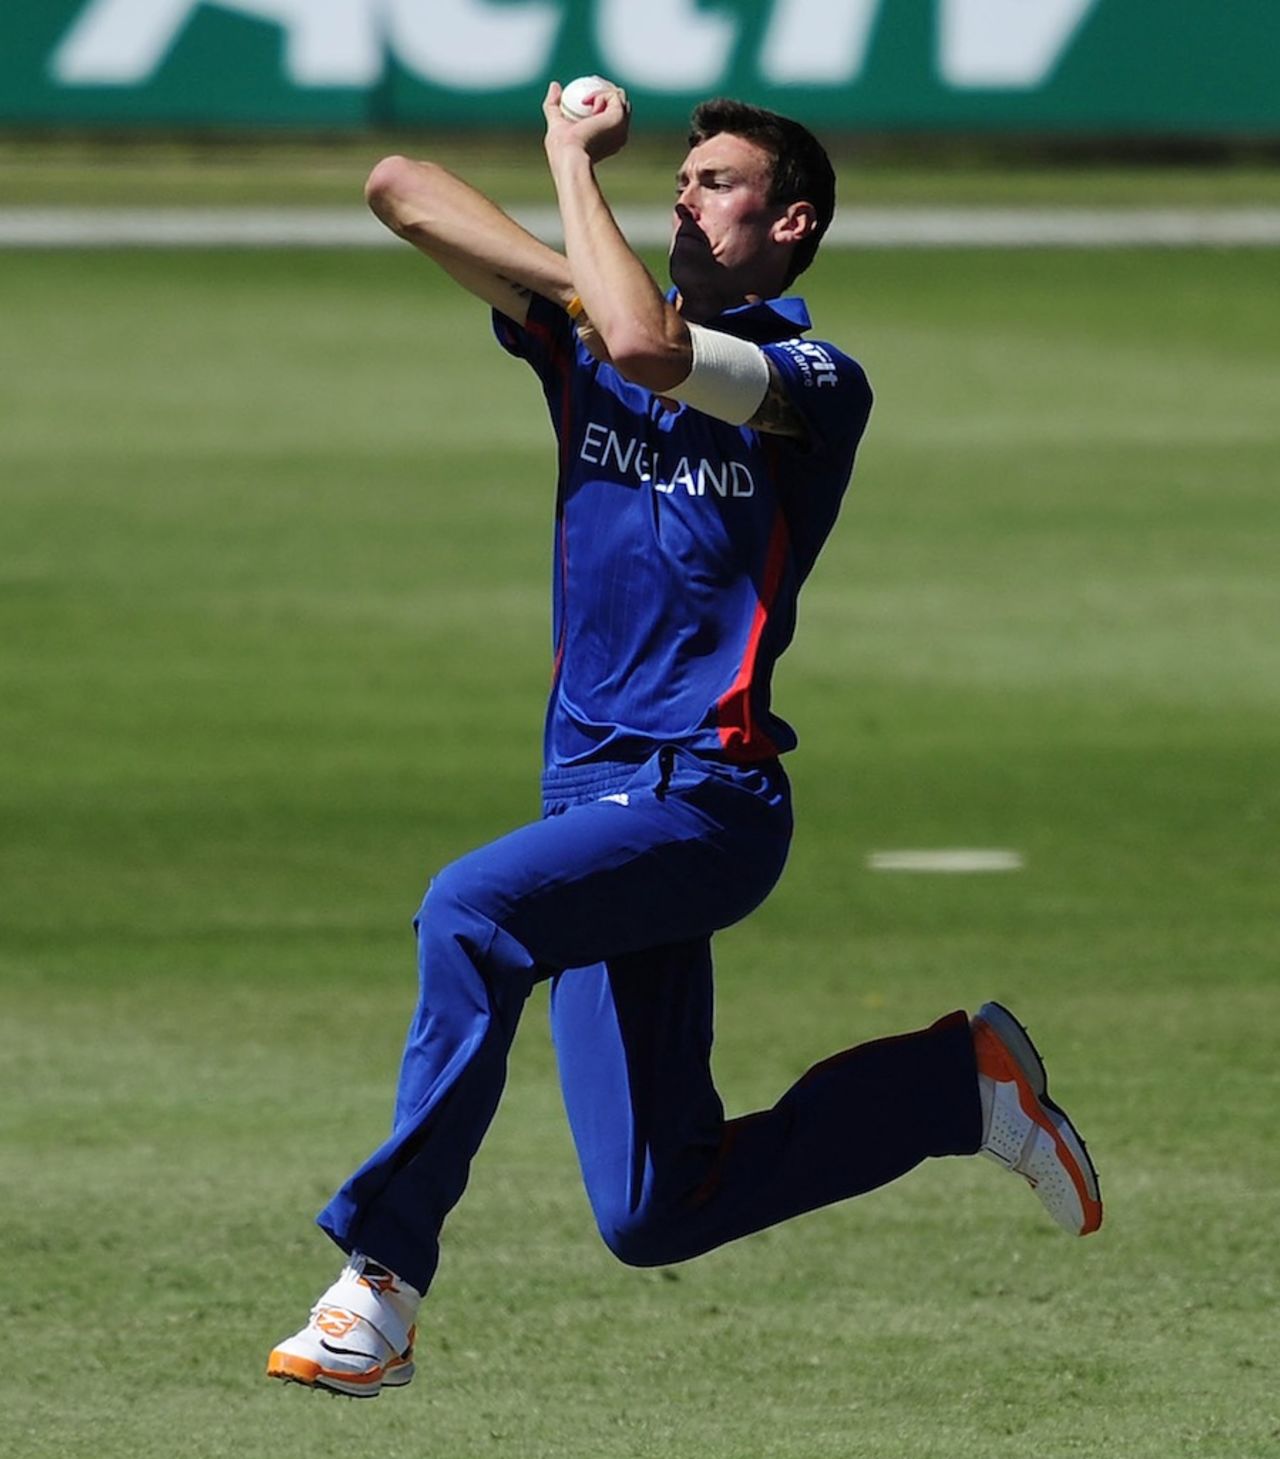 Reece Topley prepares to bowl, Australia v England, ICC U-19 World Cup 2012, Townsville, August 11, 2012